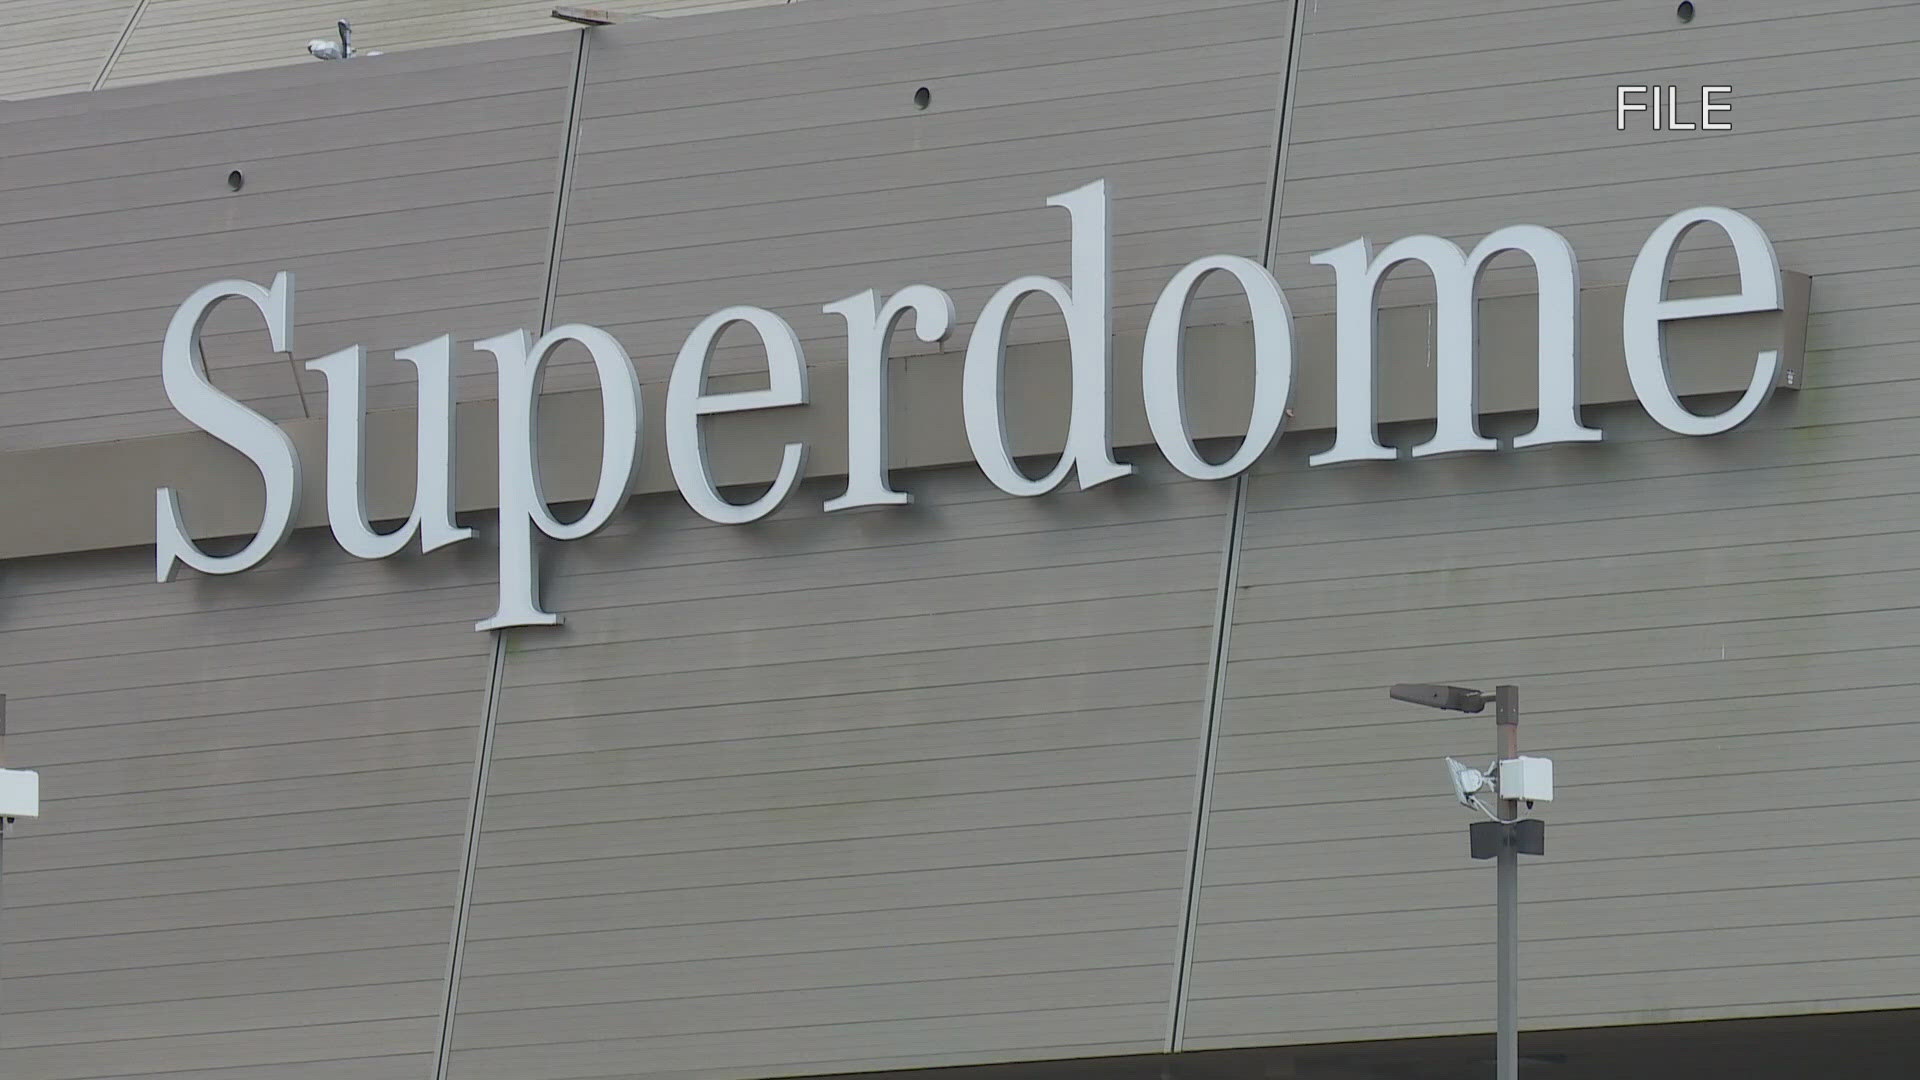 A New Orleans Saints spokesperson confirmed that the Saints have paid the $11.4 million they owed for renovations at the Superdome on Friday.